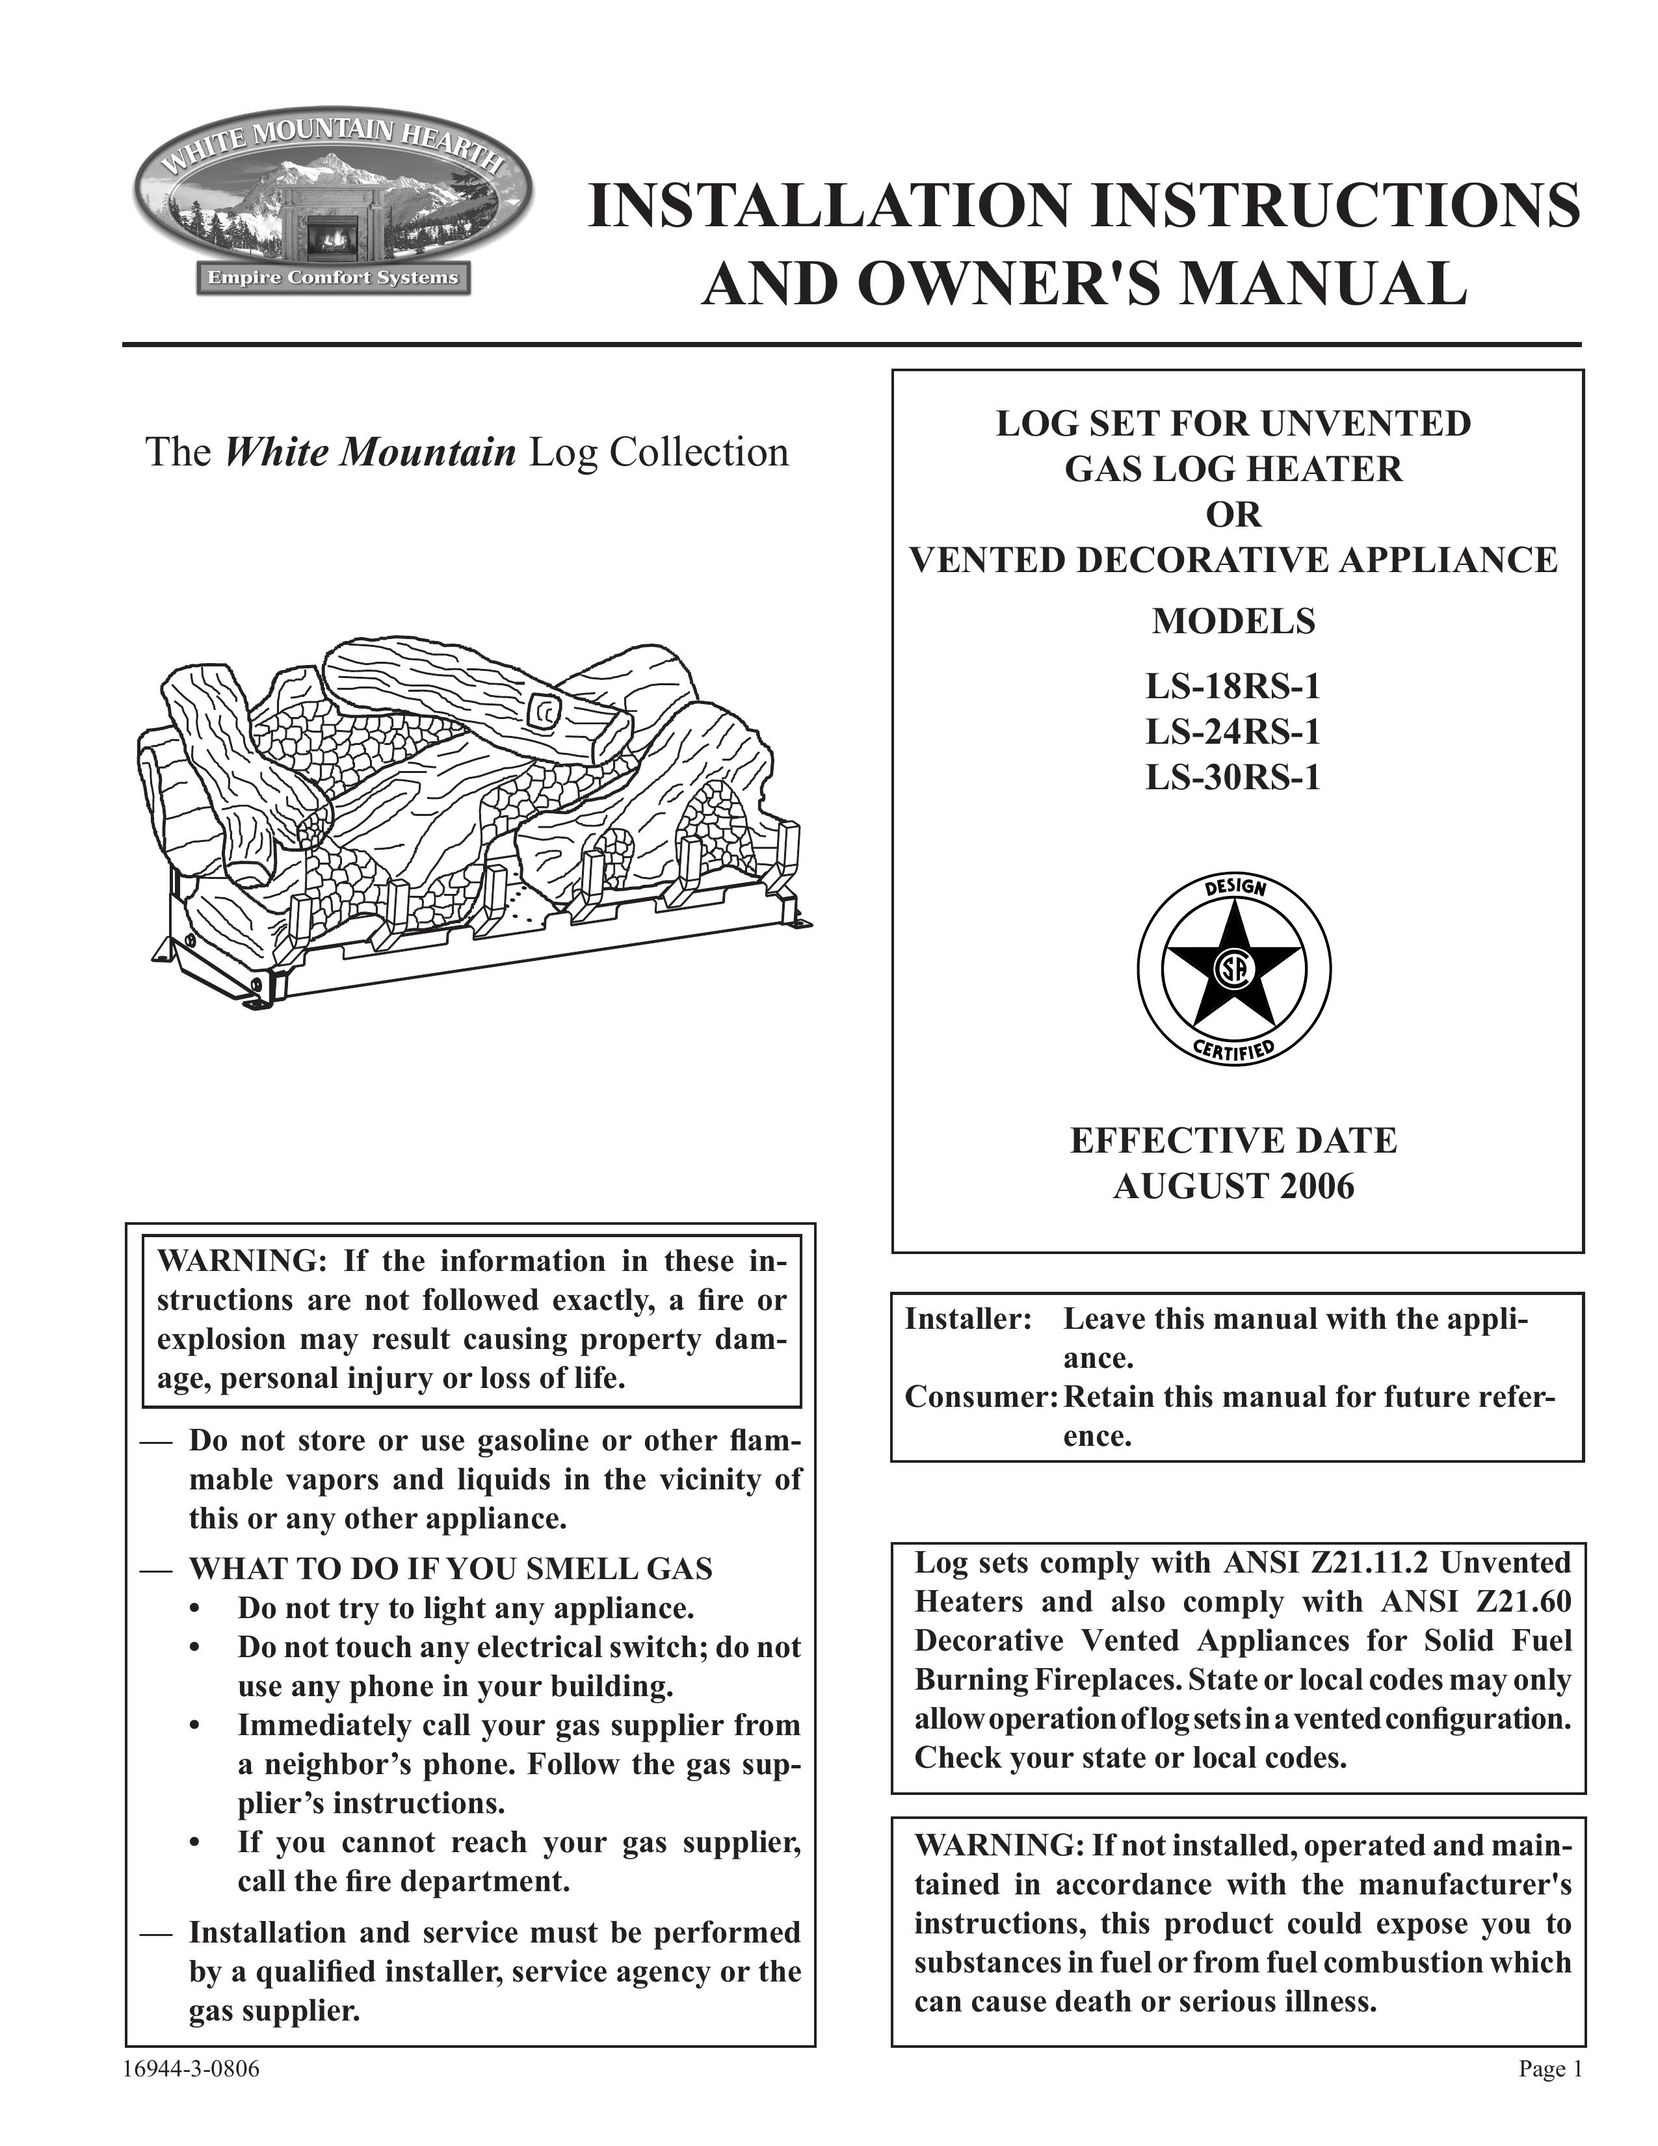 Empire Comfort Systems LS-30RS-1 Electric Heater User Manual